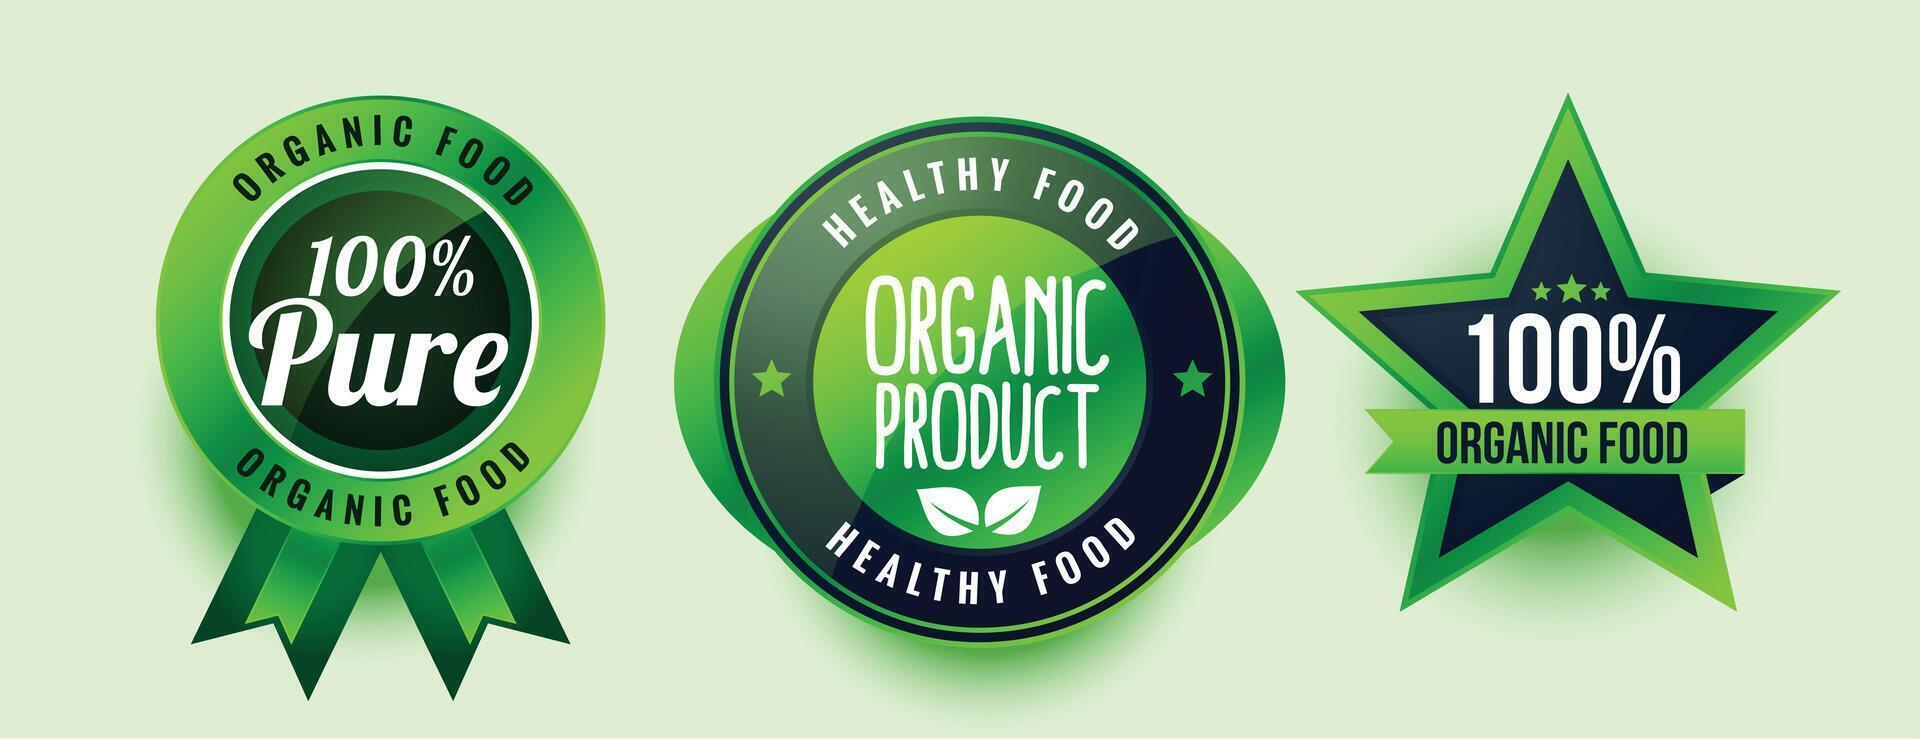 collection of eco friendly organic product green label or badge design vector